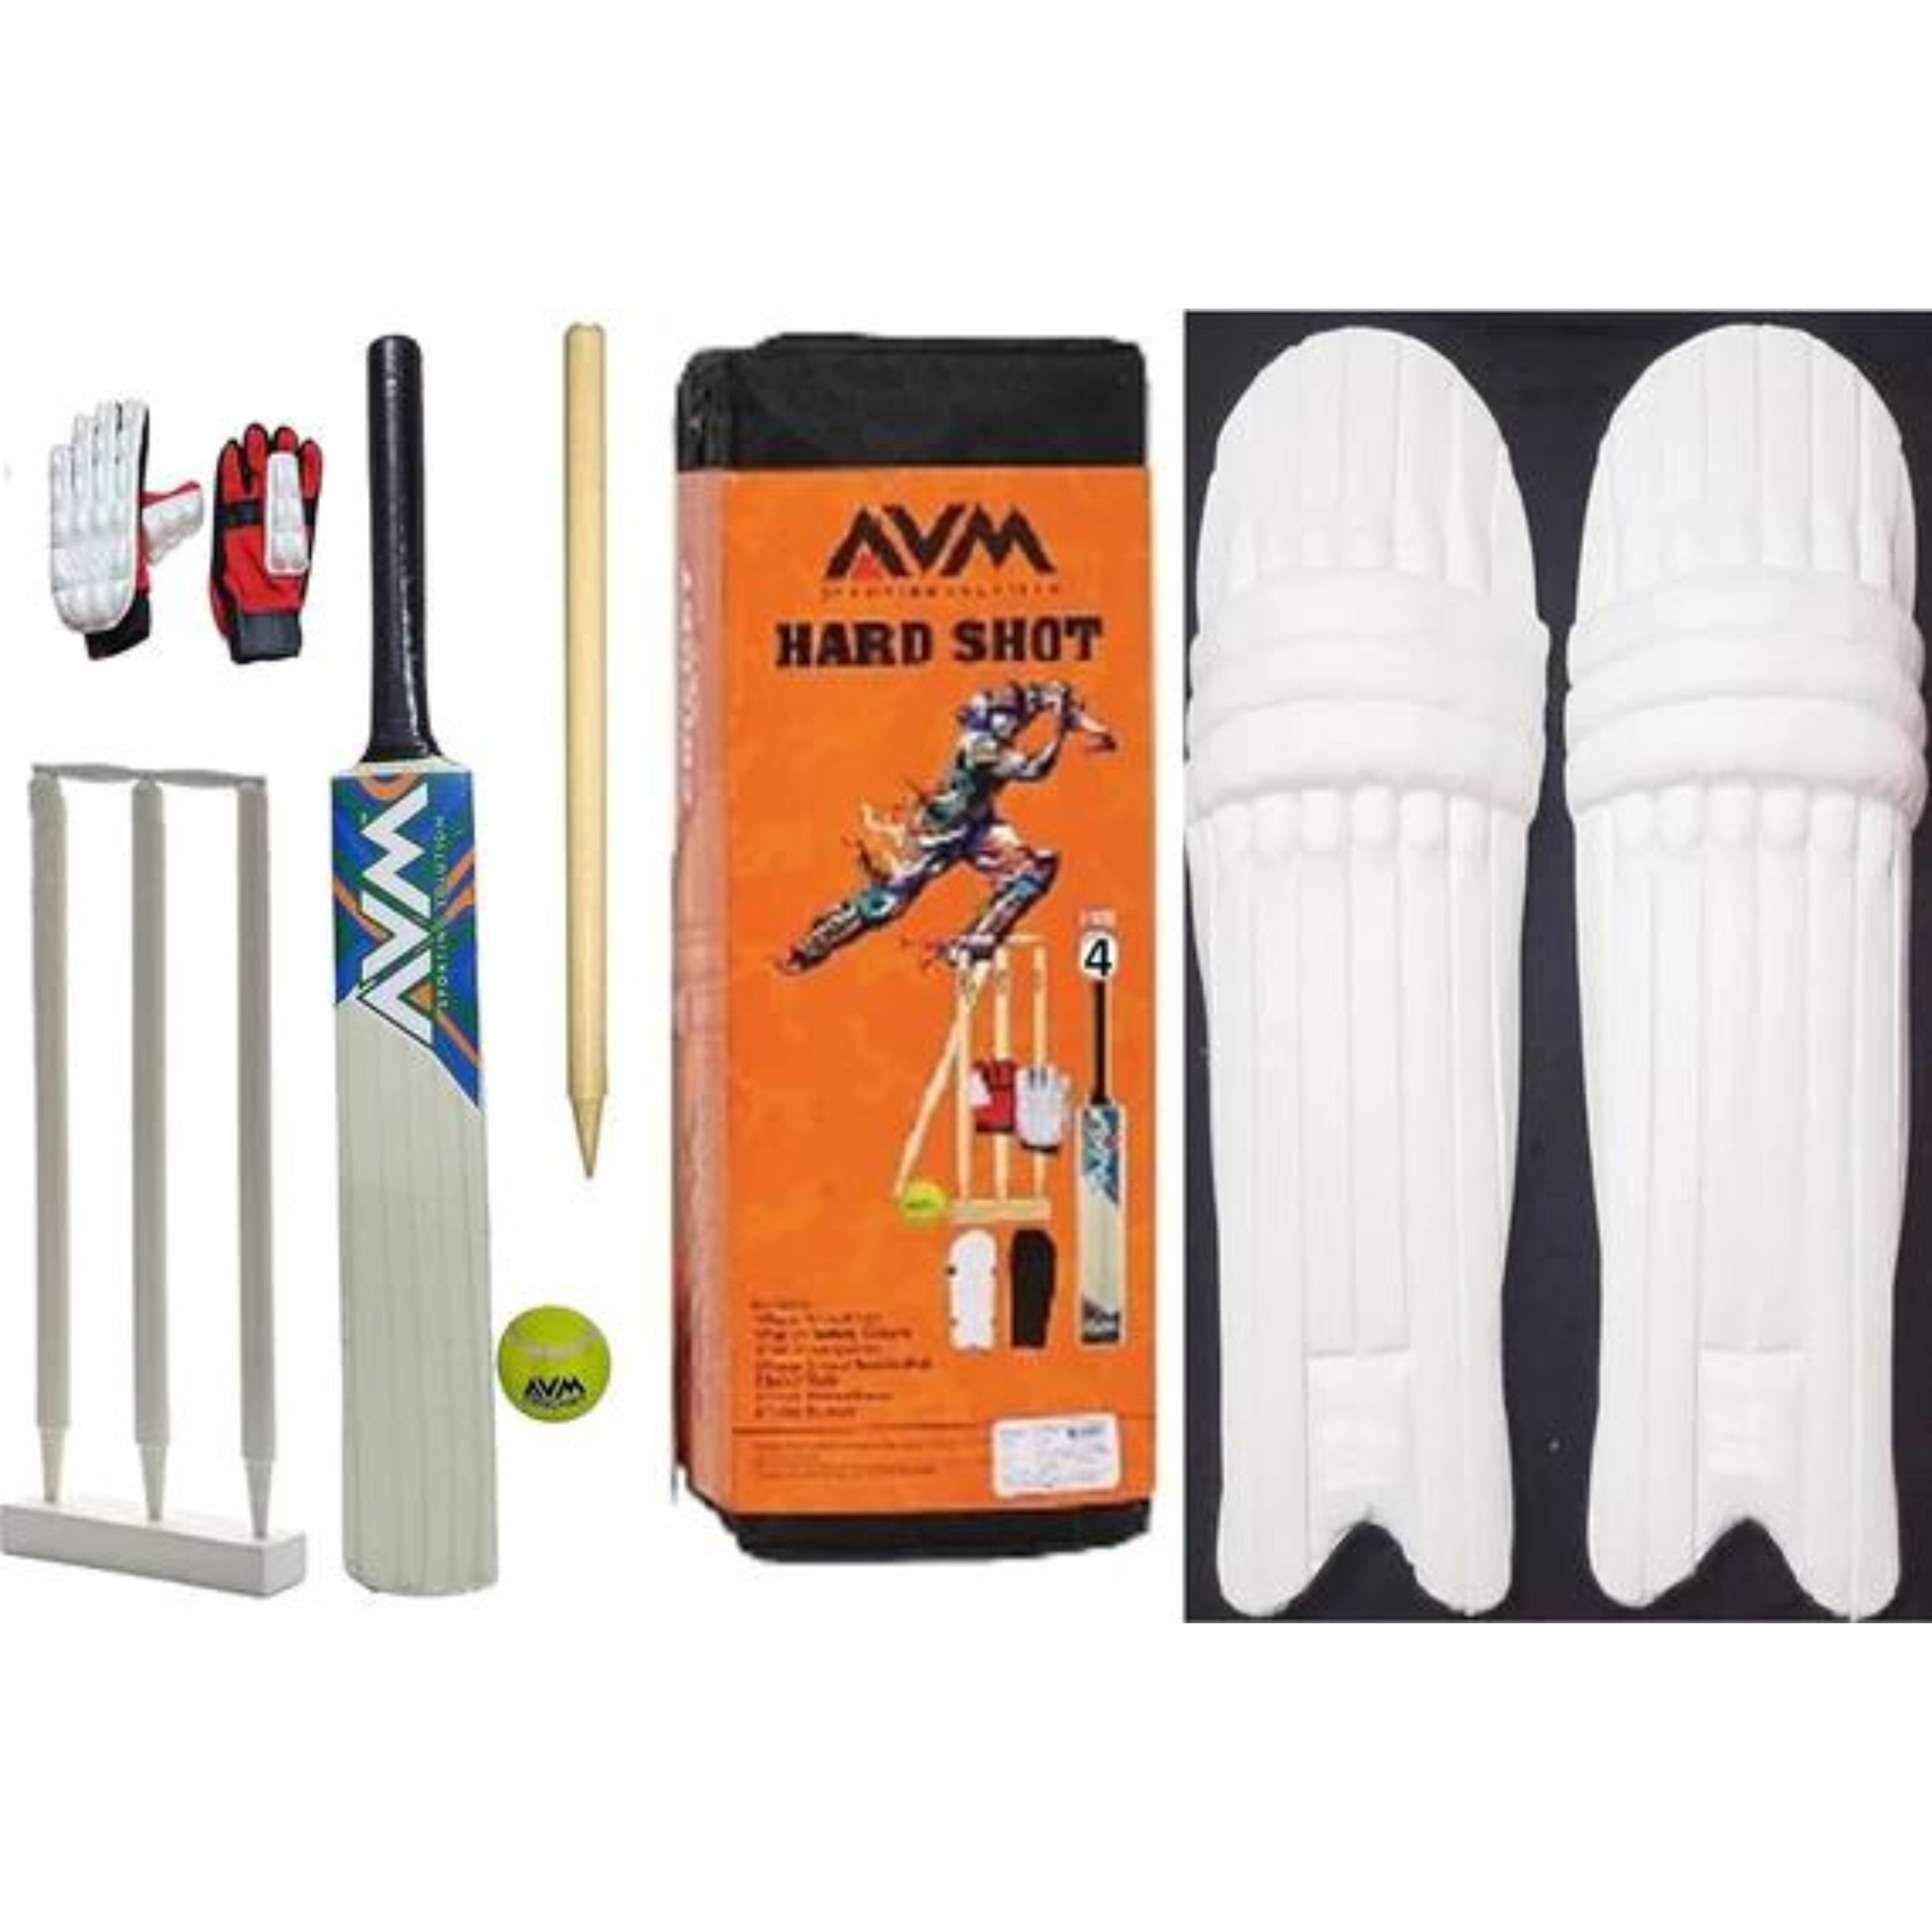 Fratelli AVM Practice Cricket Kit with 4 Wooden Wicket with Stand, Cricket Bat + Leg Guard + Batting Gloves + Kitbag + Gloves + bails + Tennis Ball – Size 4